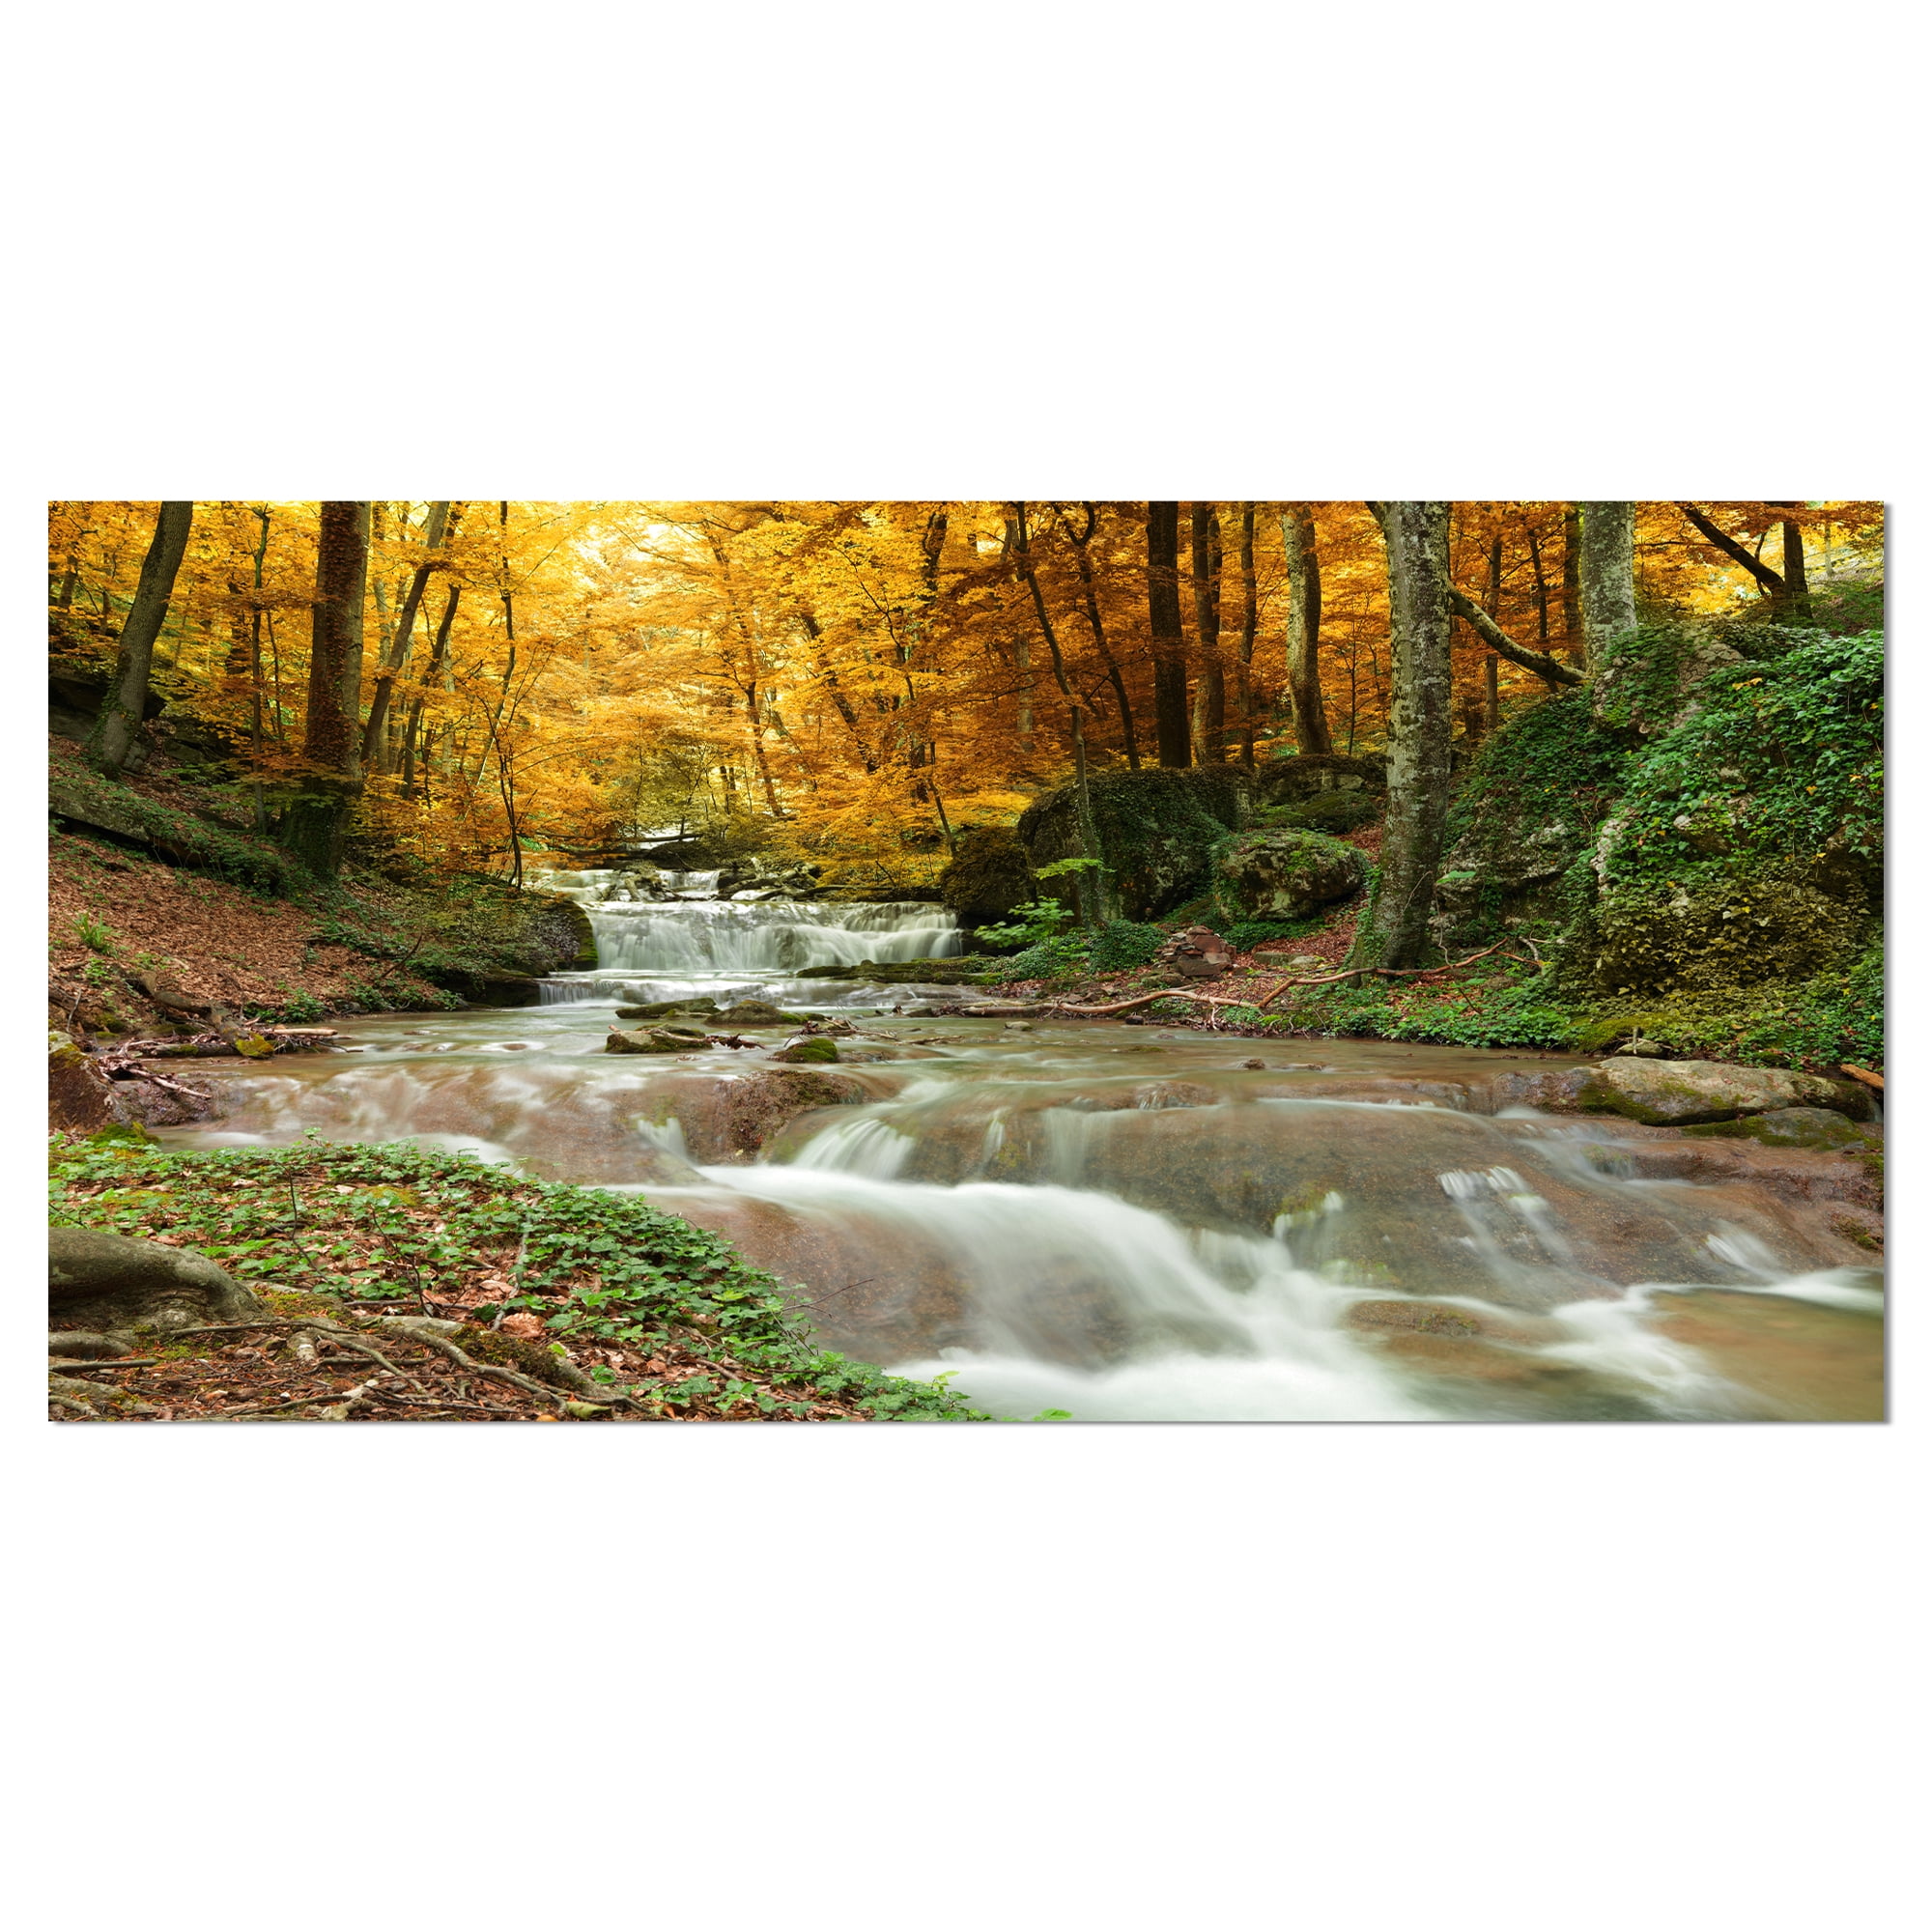 Autumn Waterfalls Fall Trees 2.3 Wall Art Canvas Picture Print 